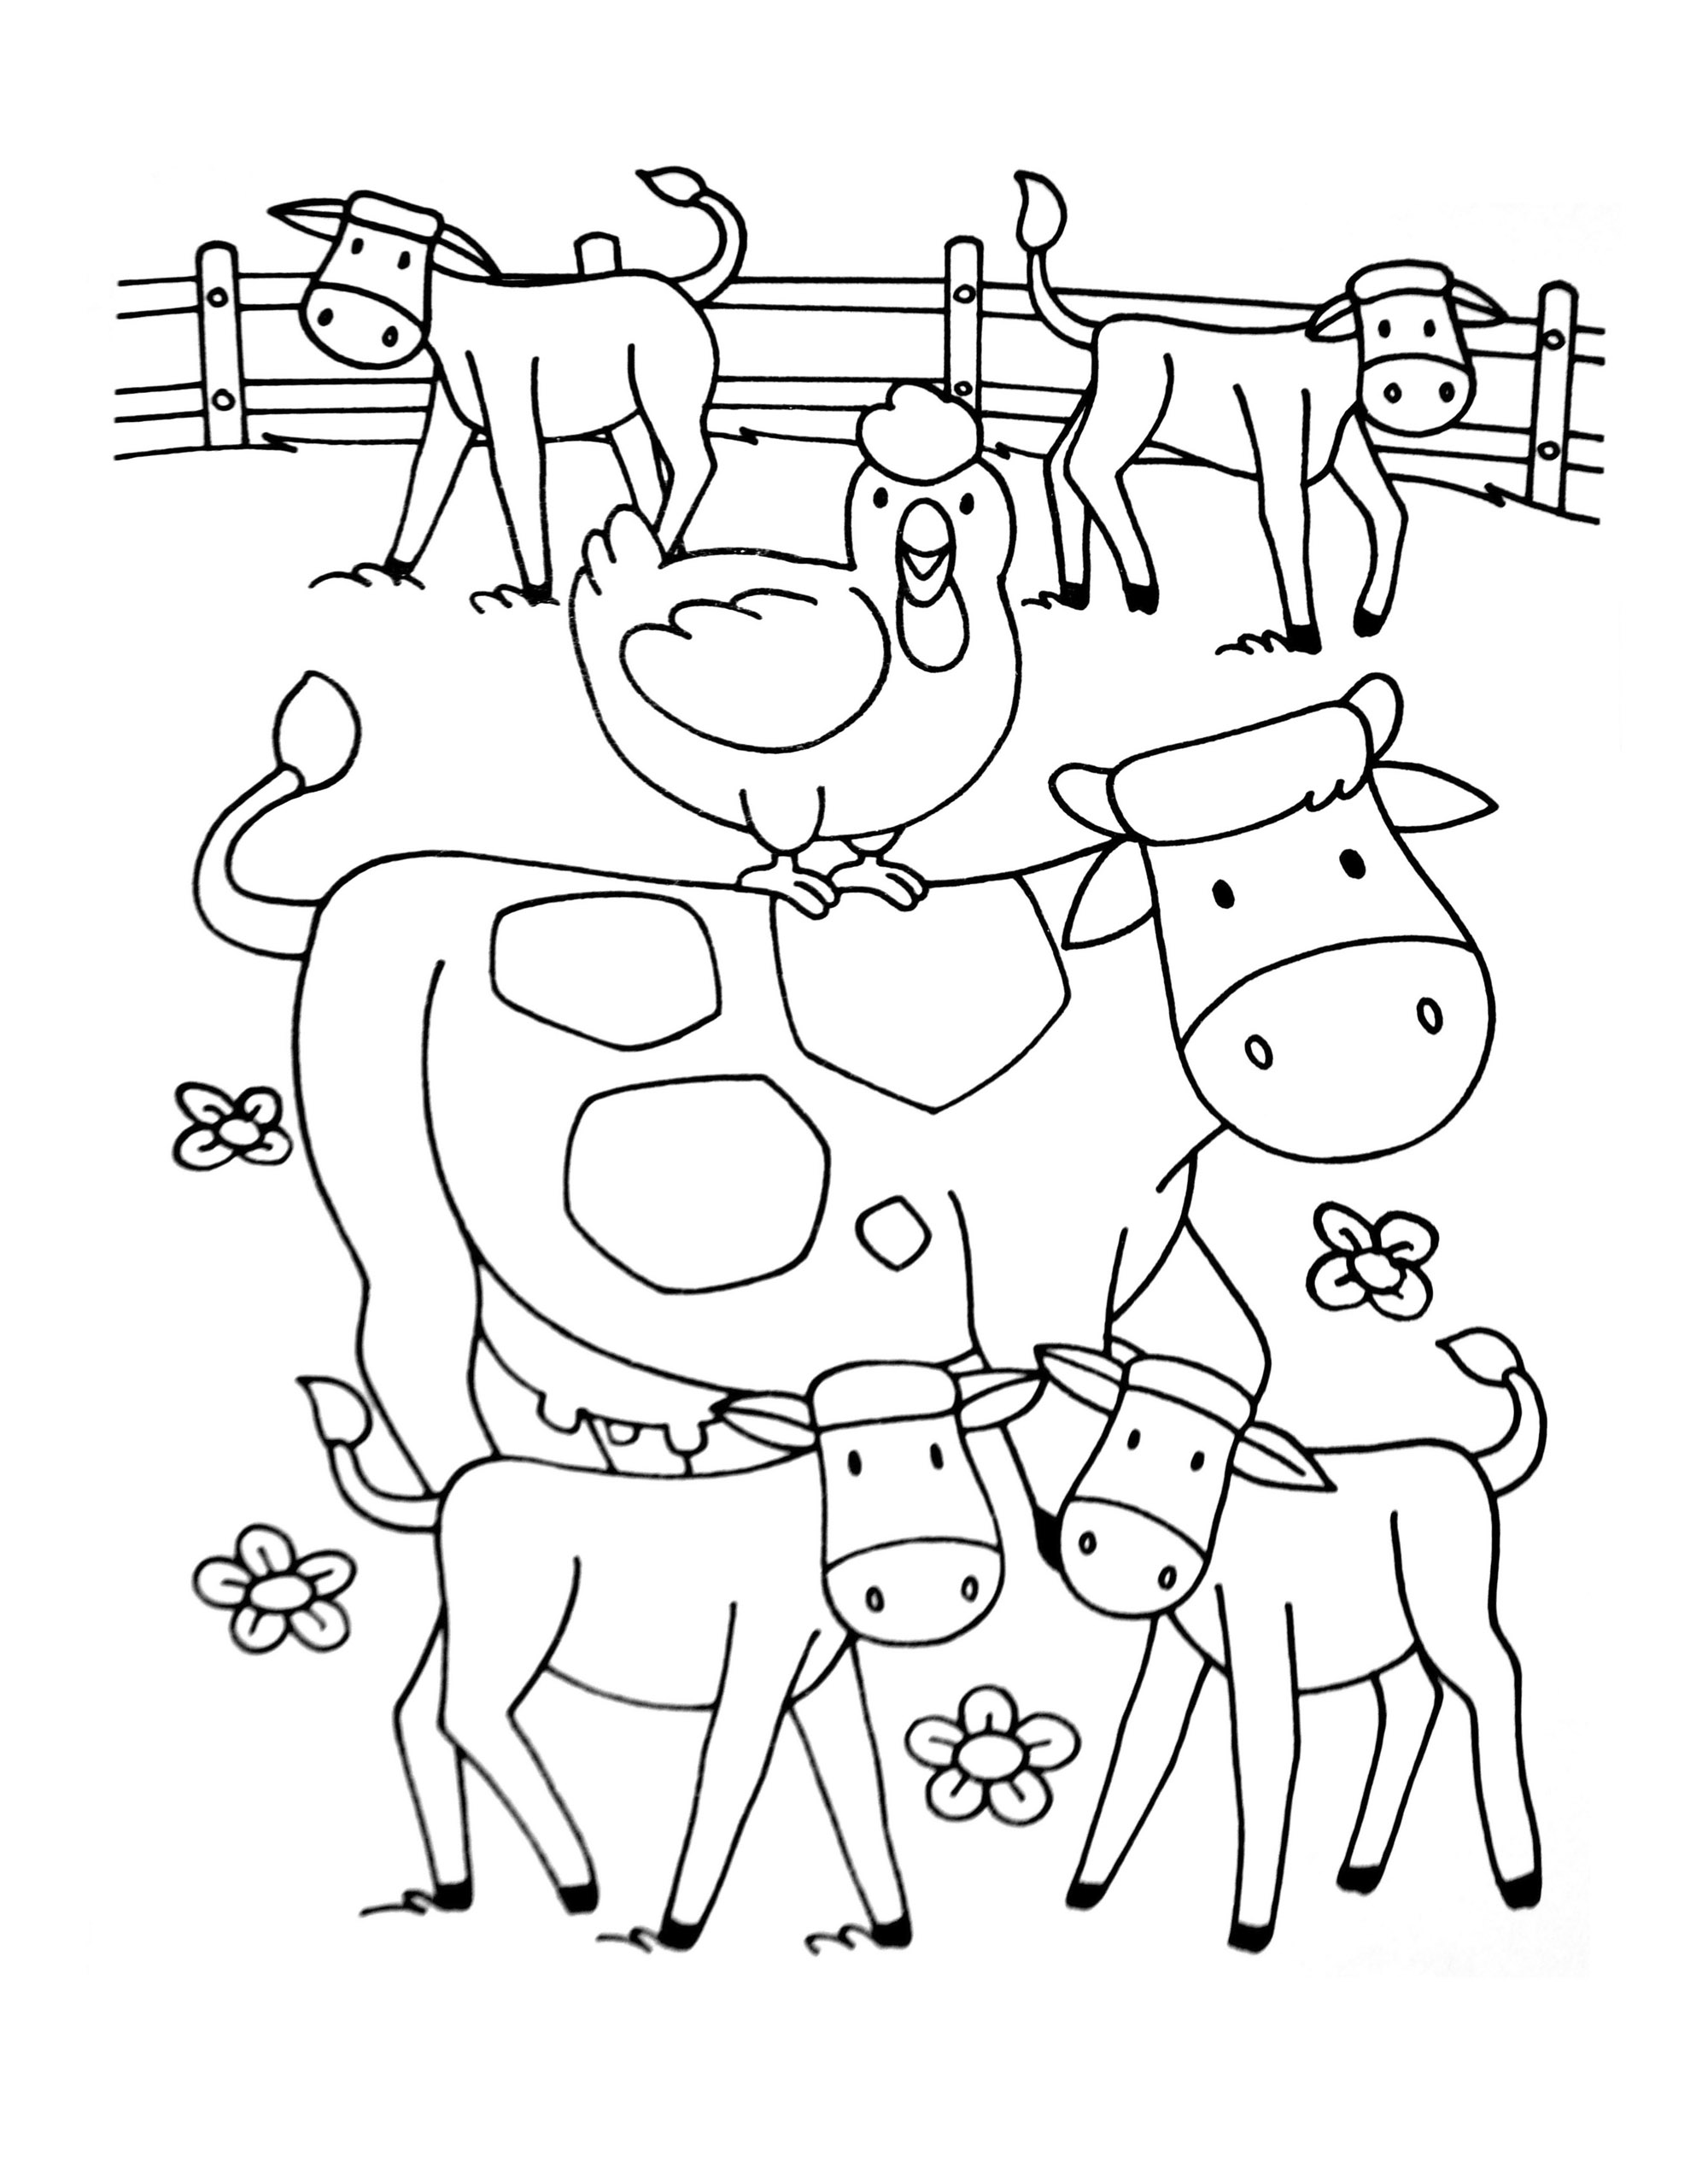 Buy Farm Animals Grid Drawing Book for Kids Book Online at Low Prices in  India | Farm Animals Grid Drawing Book for Kids Reviews & Ratings -  Amazon.in